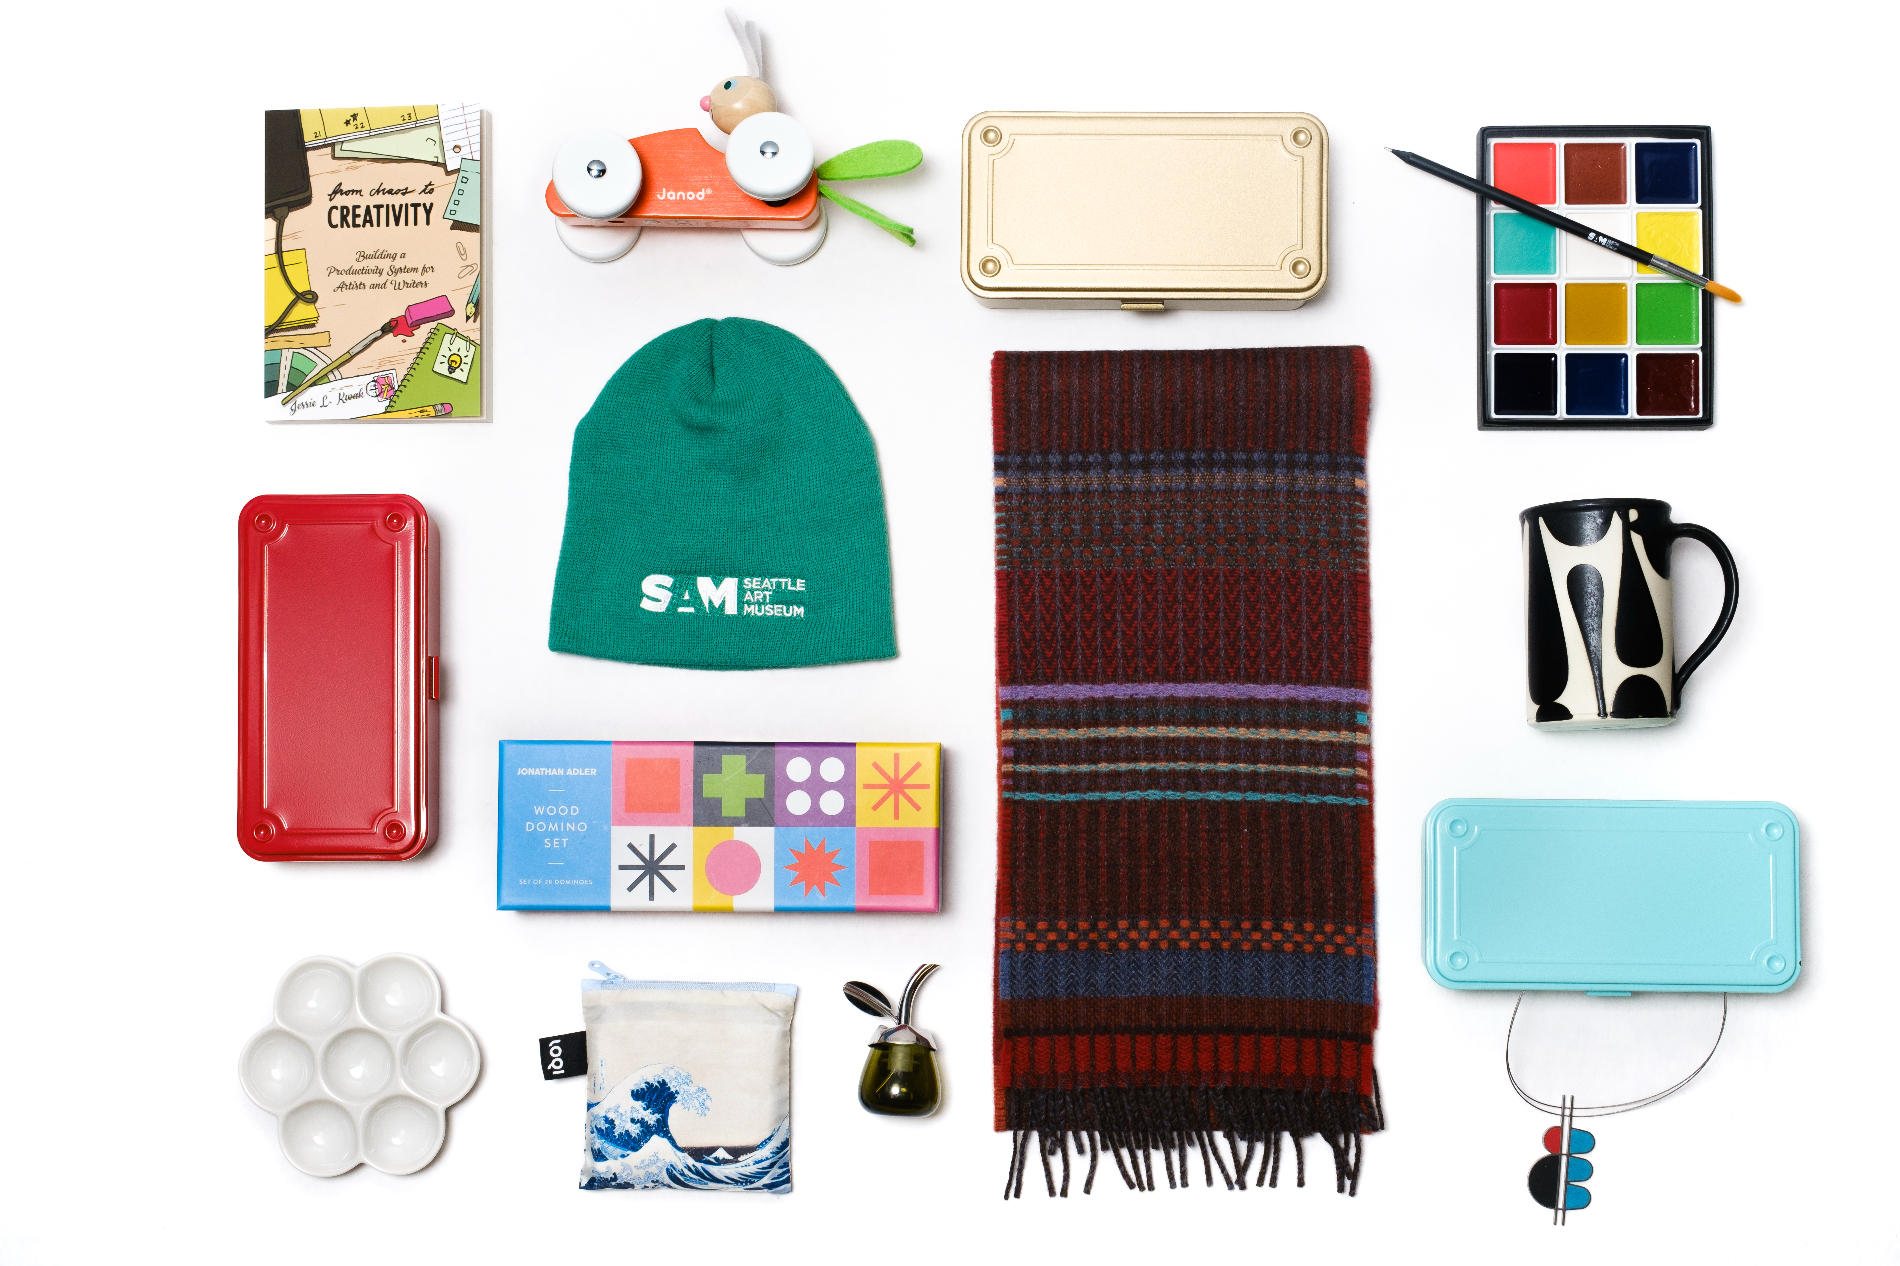 A holiday gift guide collage of objects against a white background, including a beanie, scarf, jewelry, toys, and art-making supplies